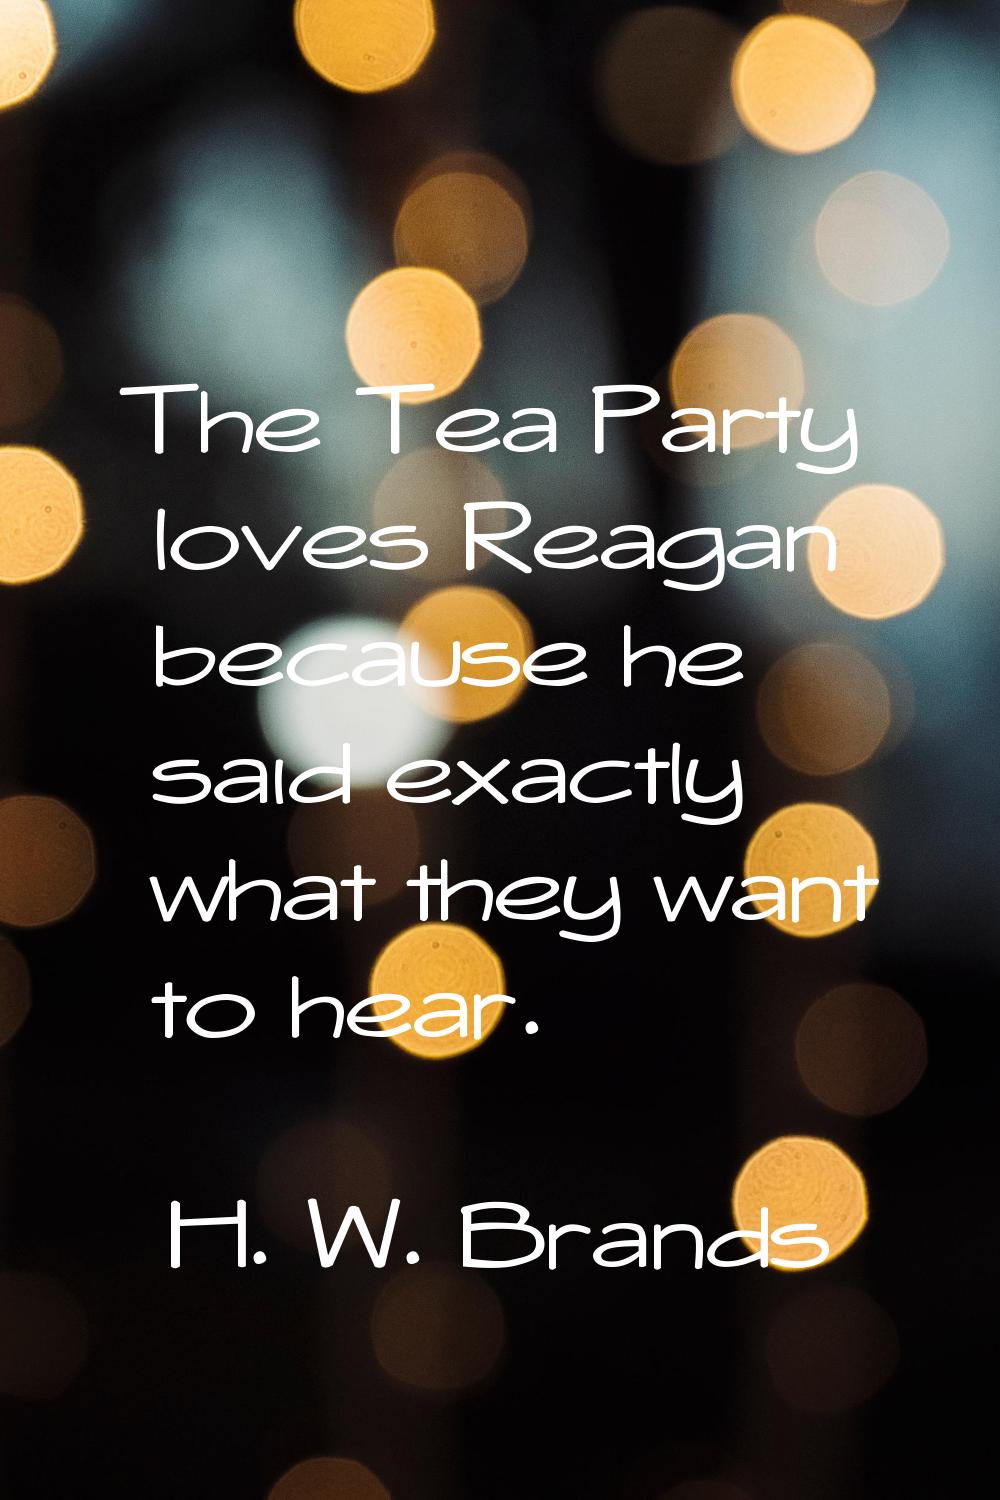 The Tea Party loves Reagan because he said exactly what they want to hear.